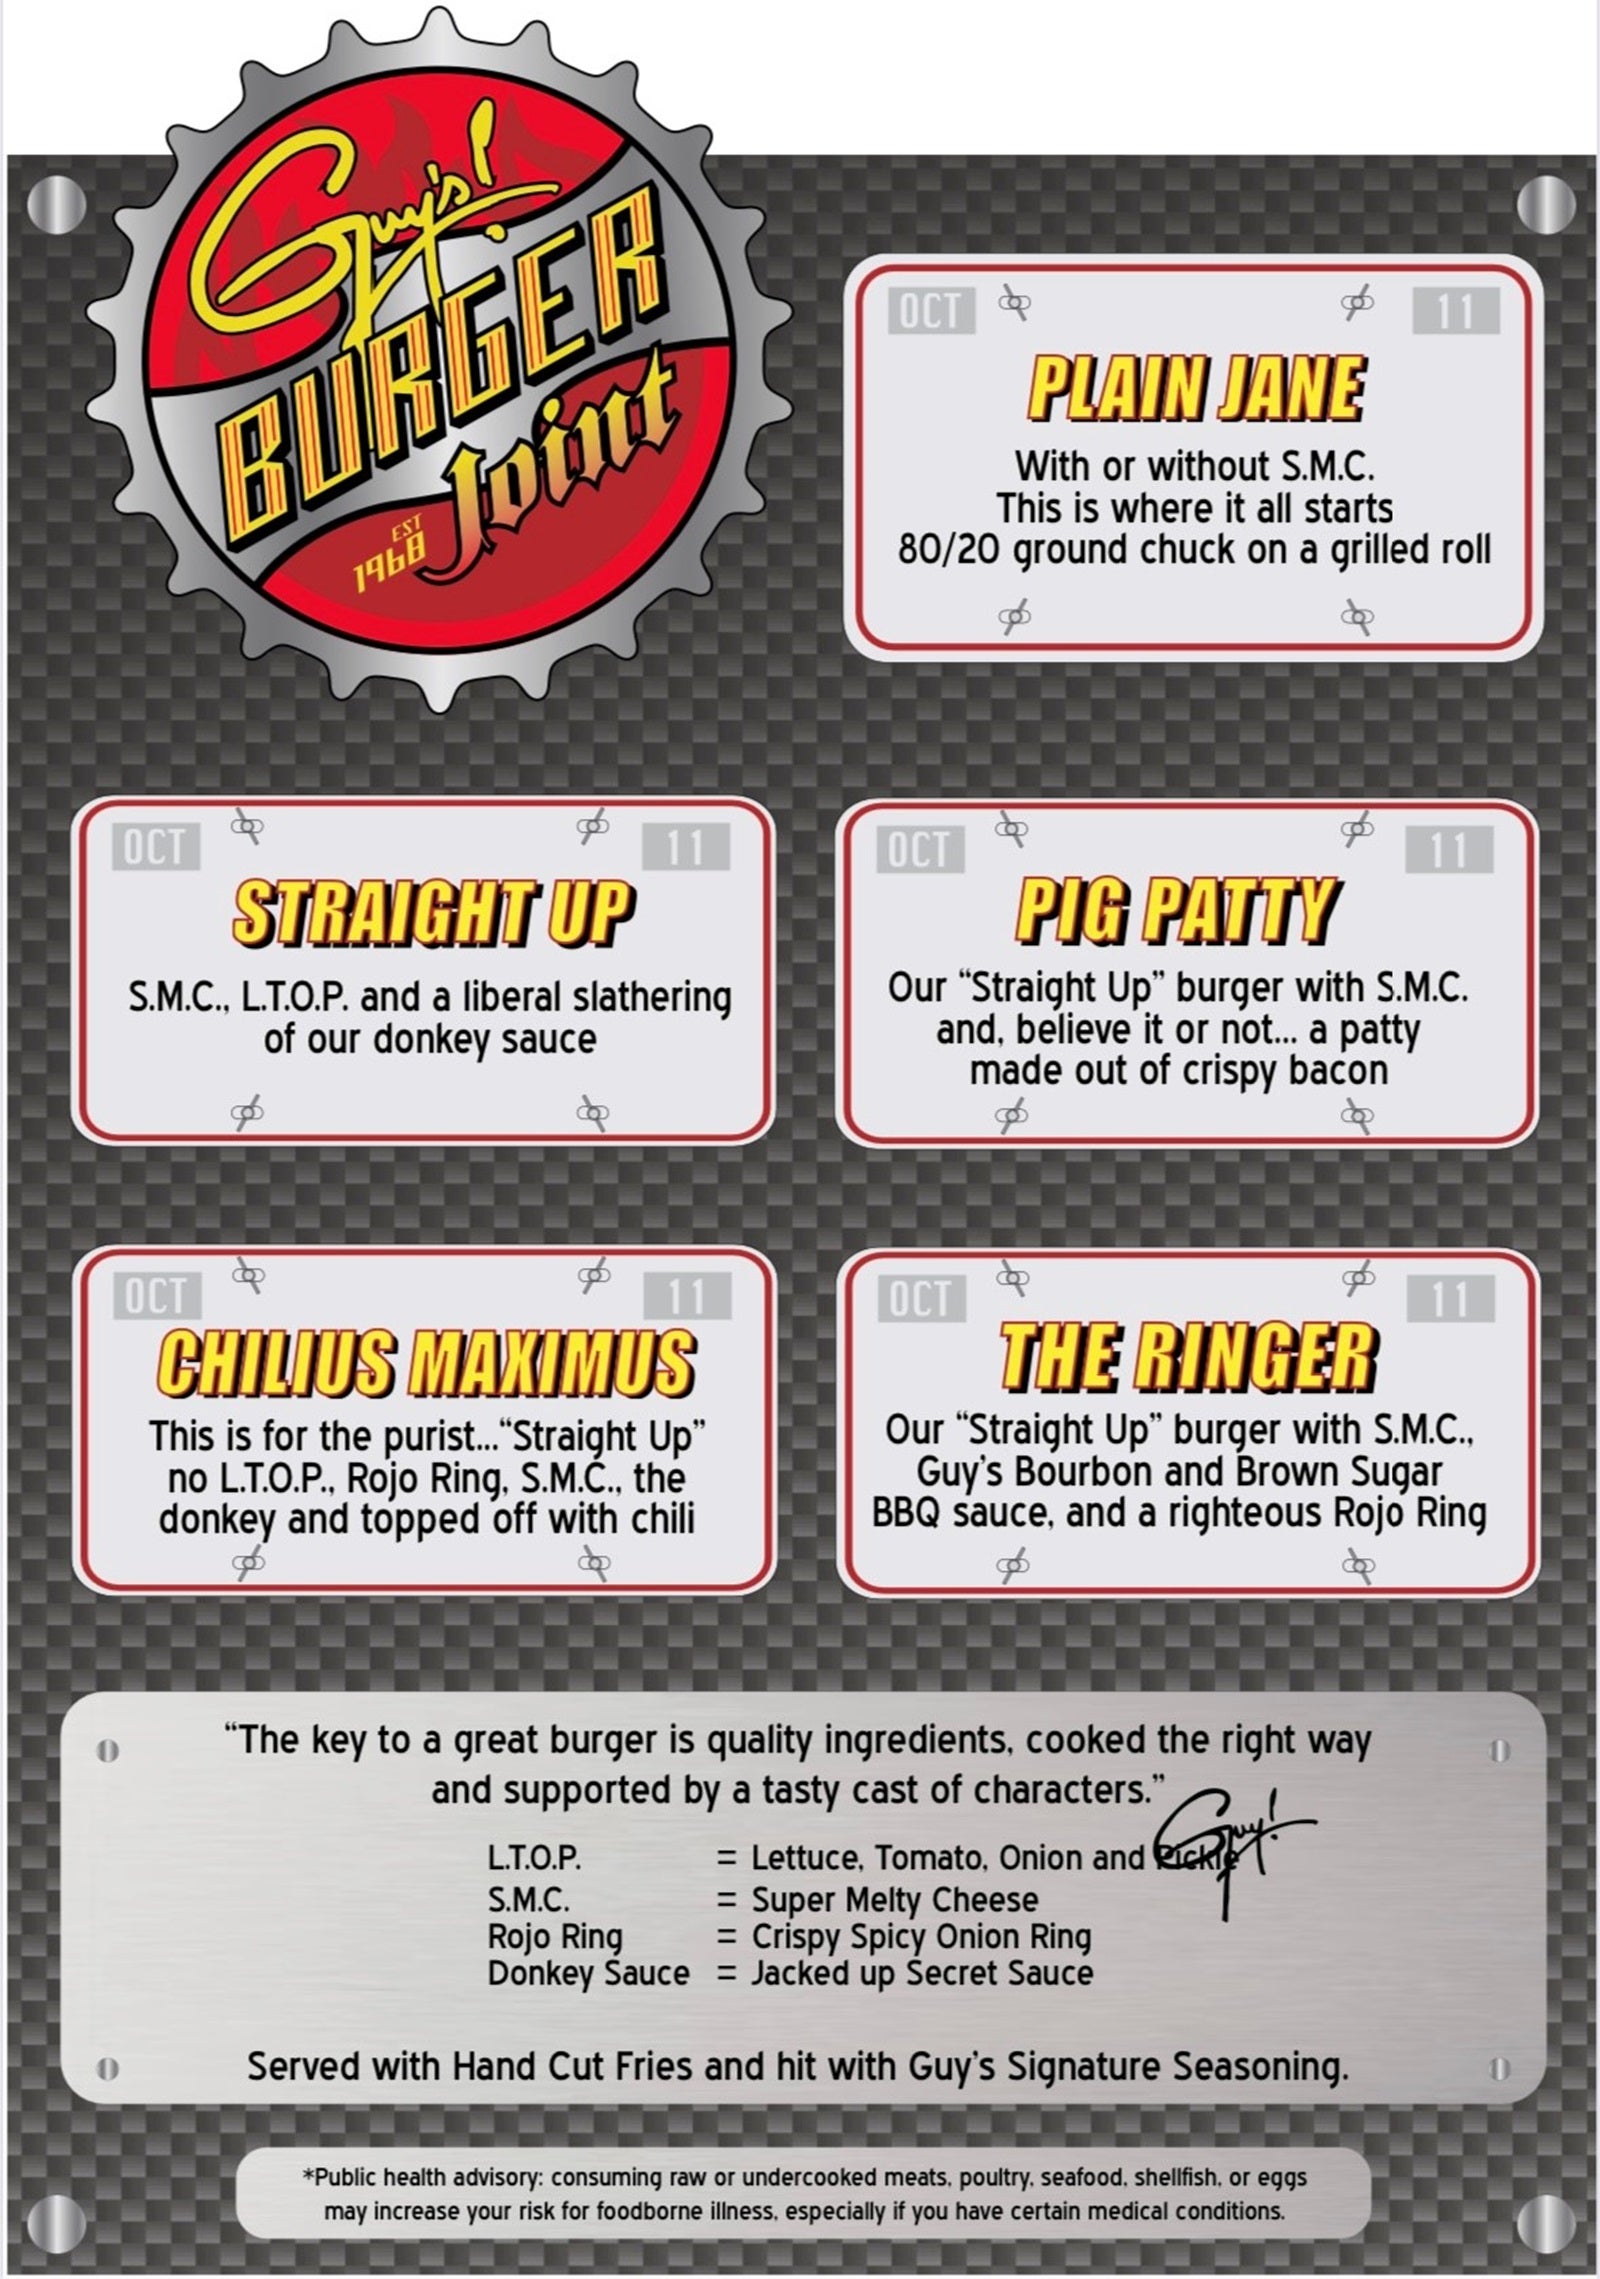 A menu for Guy's Burger Joint, listing five types of burgers and what's on them